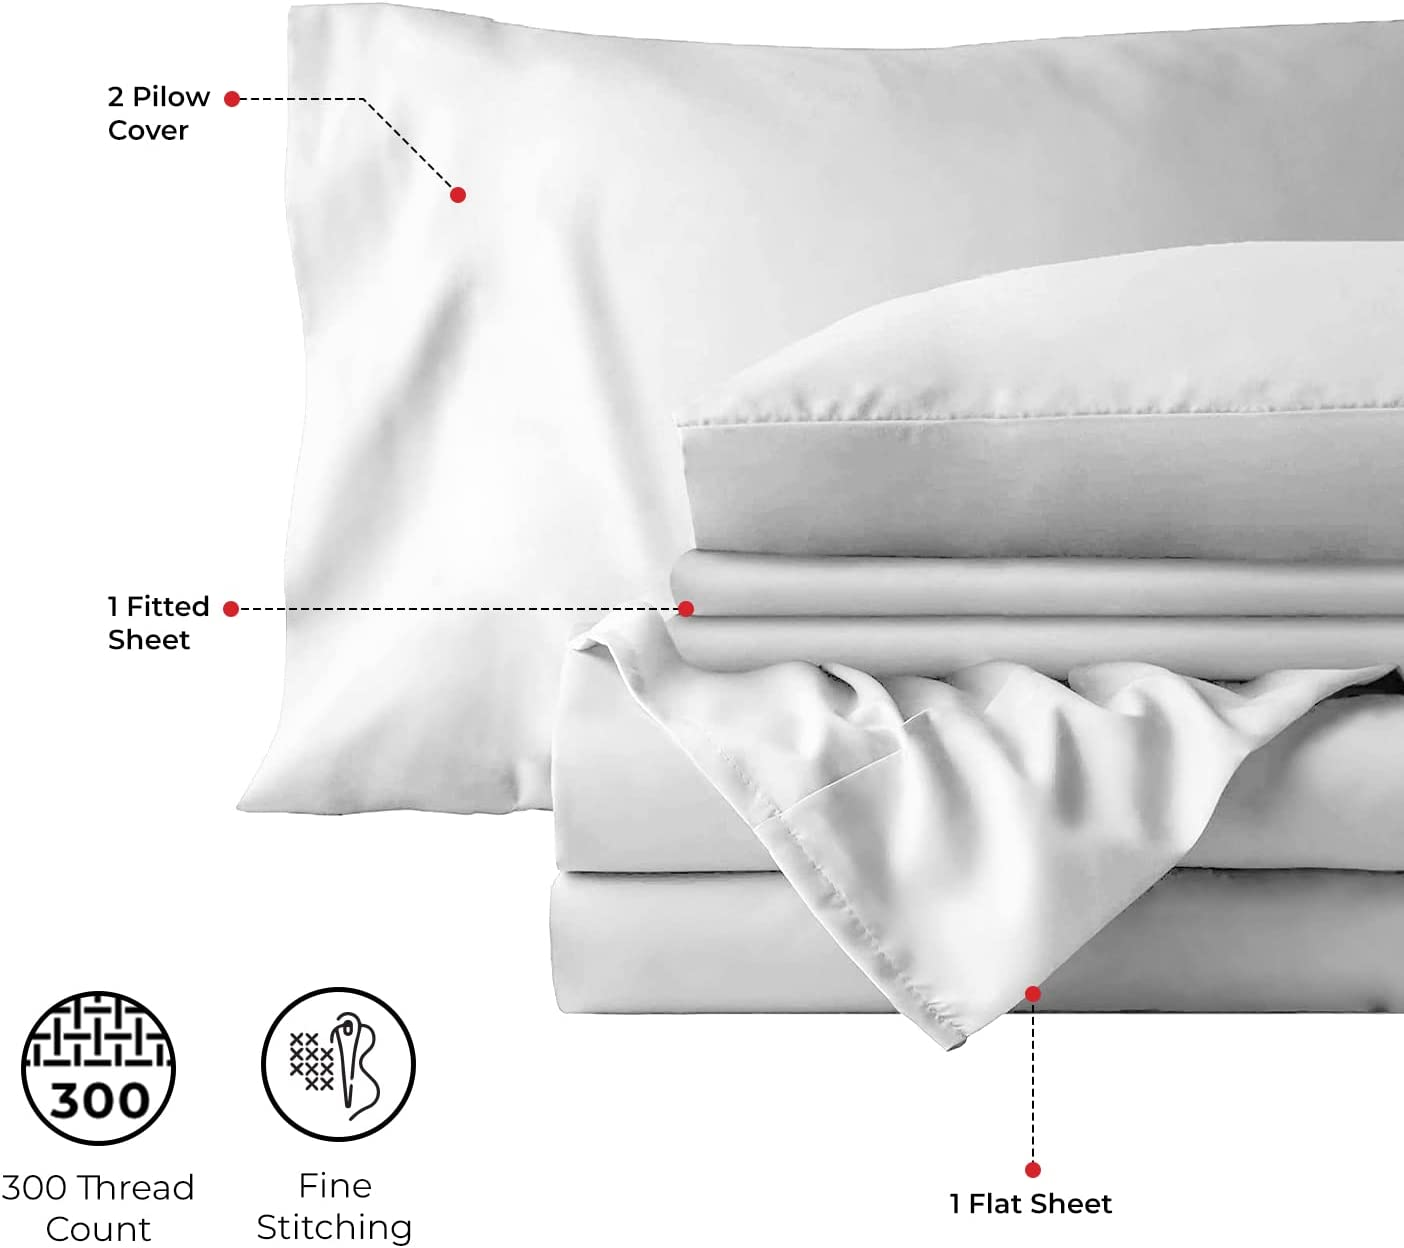 Stony Edge Bed Sheets for Any Sized Beds, 300 Thread Count, 100% Cotton, Extra Long Staple Yarns, Set of 4 Sateen Weave White Bed Sheets & Pillowcases